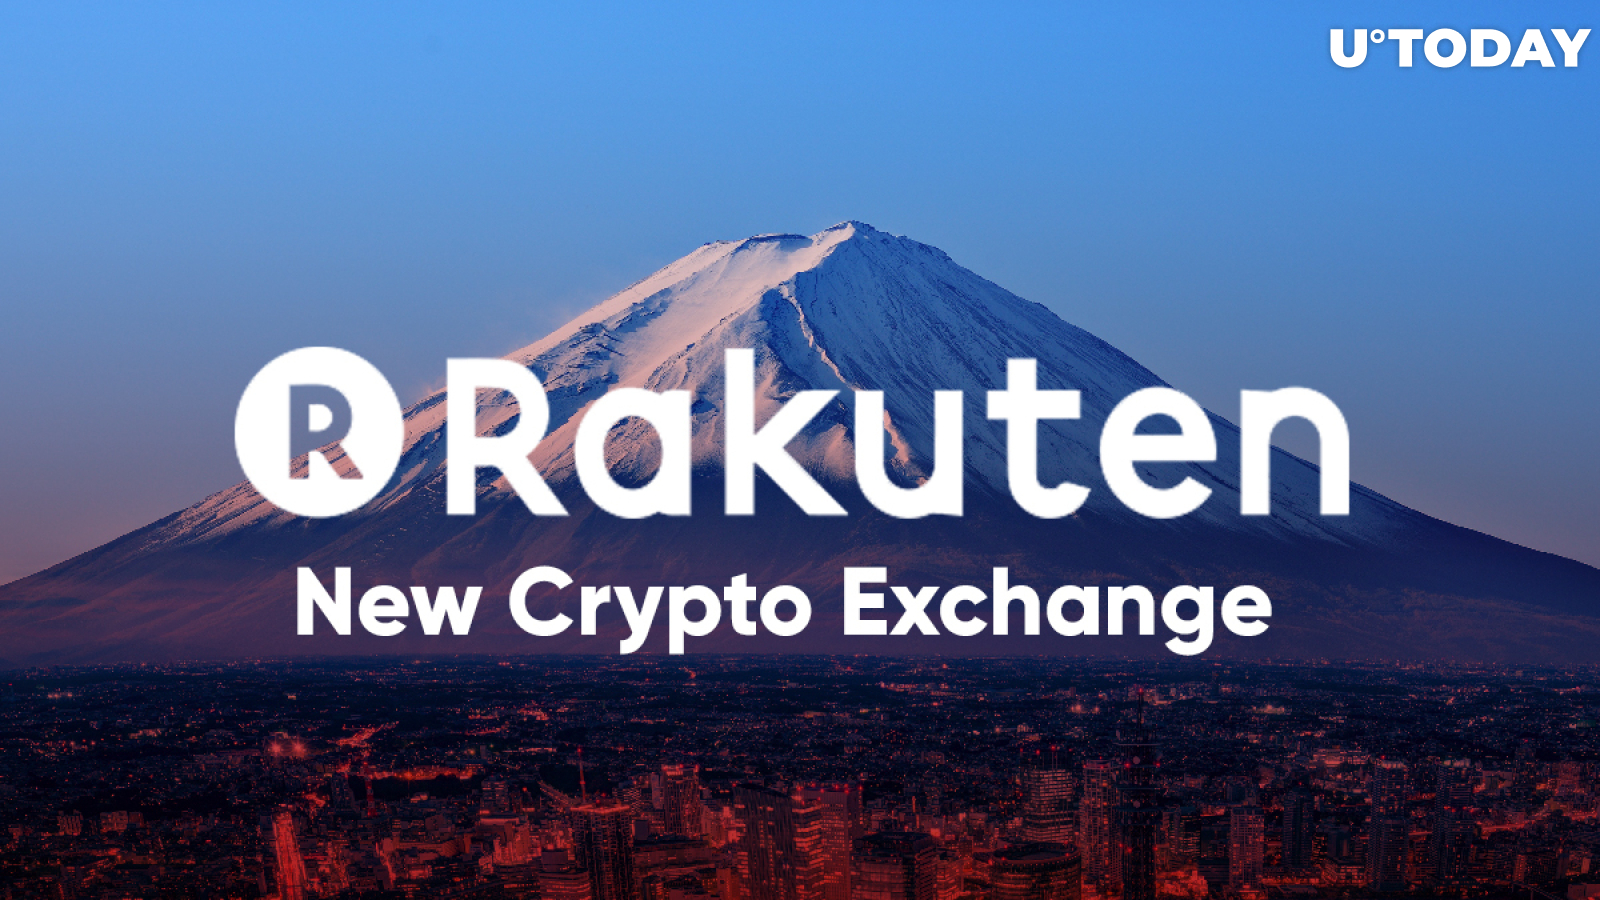 New Crypto Exchange Launched by Amazon Rival in Japan – Rakuten Giant